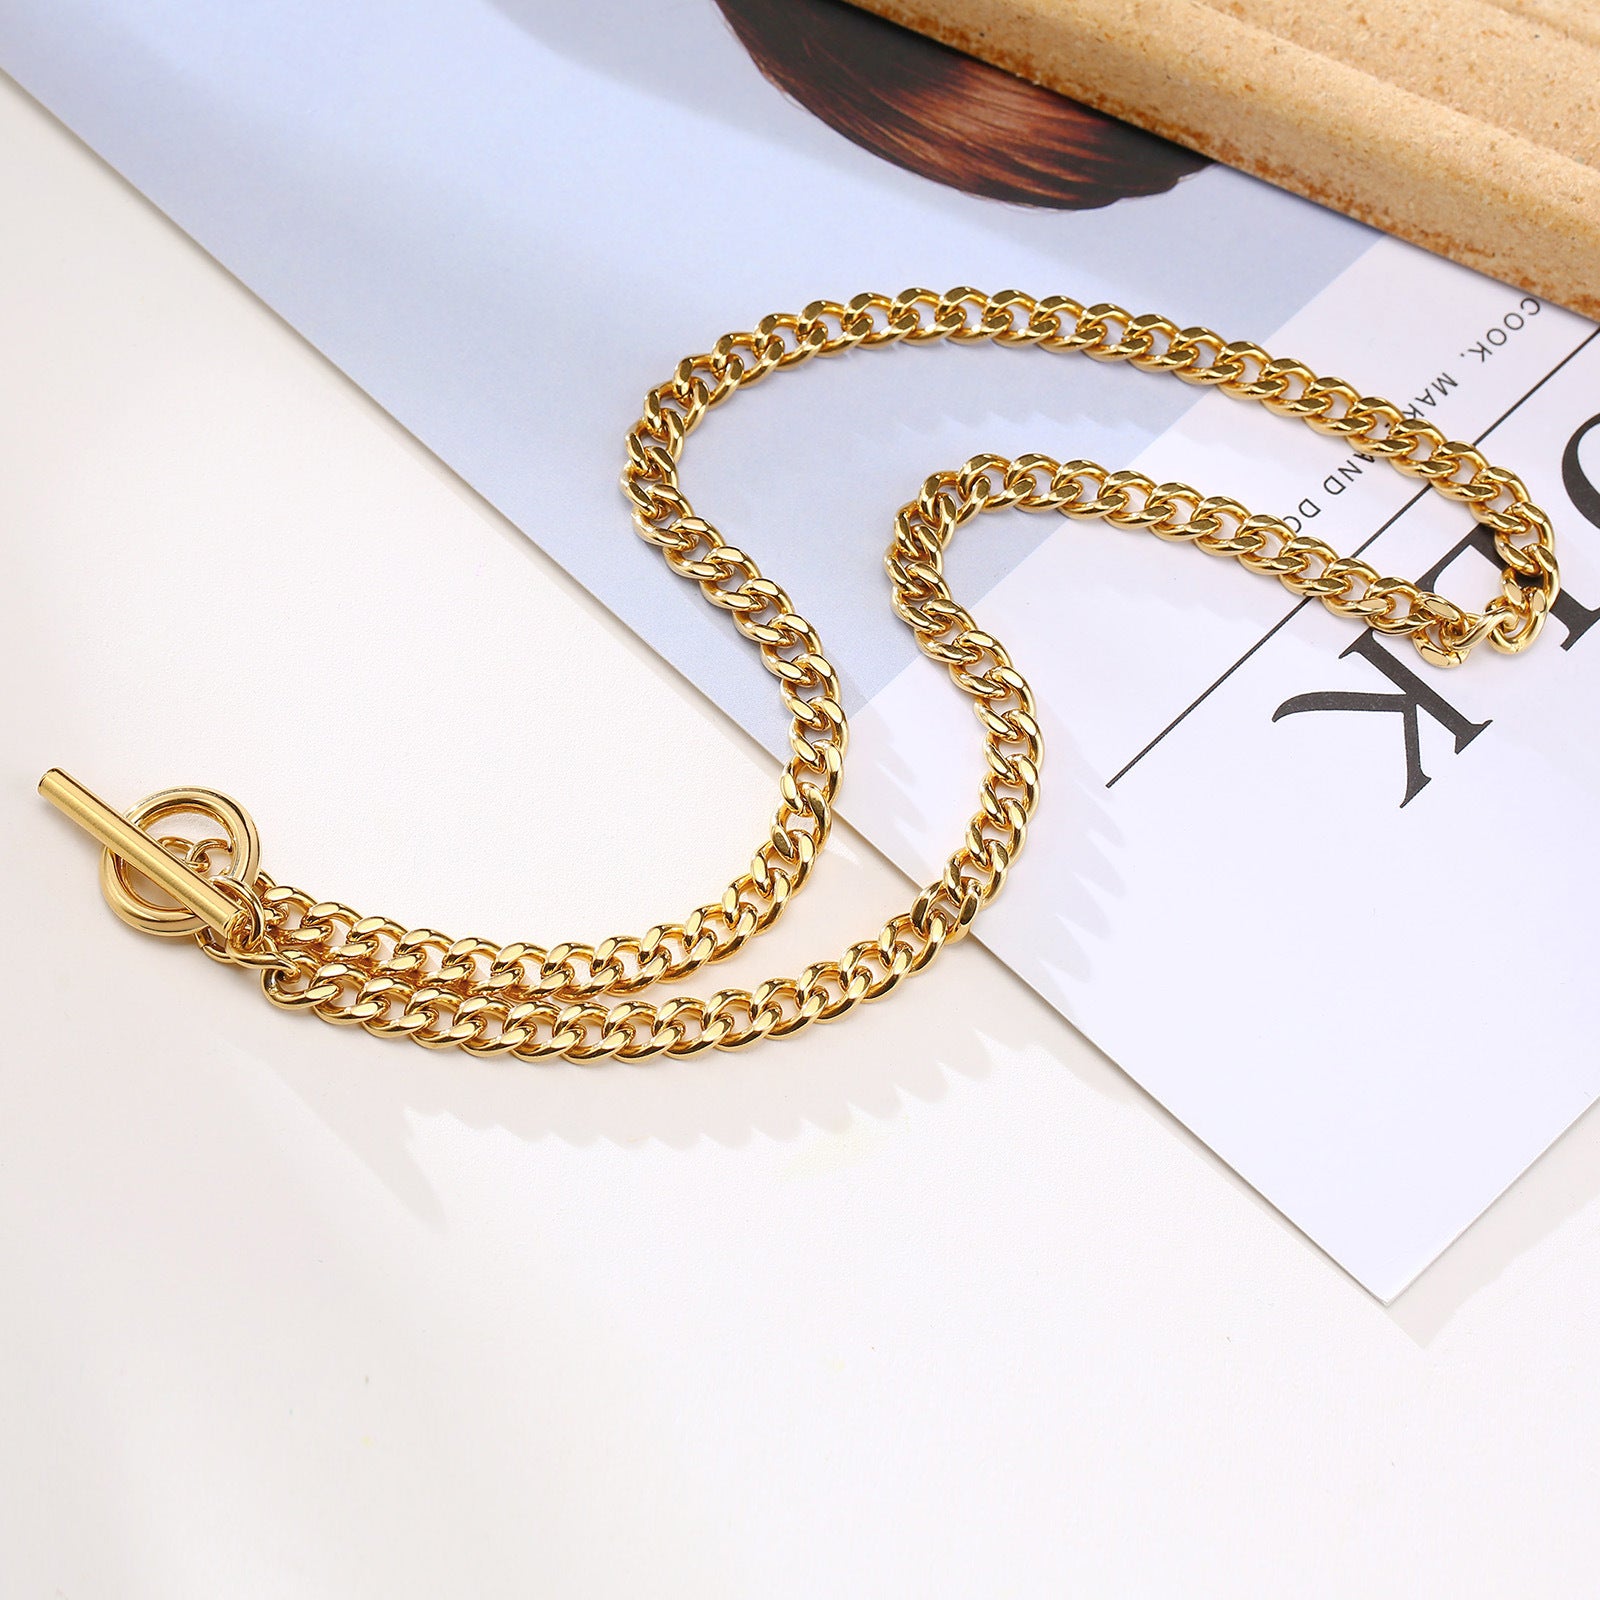 Stainless Steel Grinding Chain Necklace Gold Women's Clavicle Chain